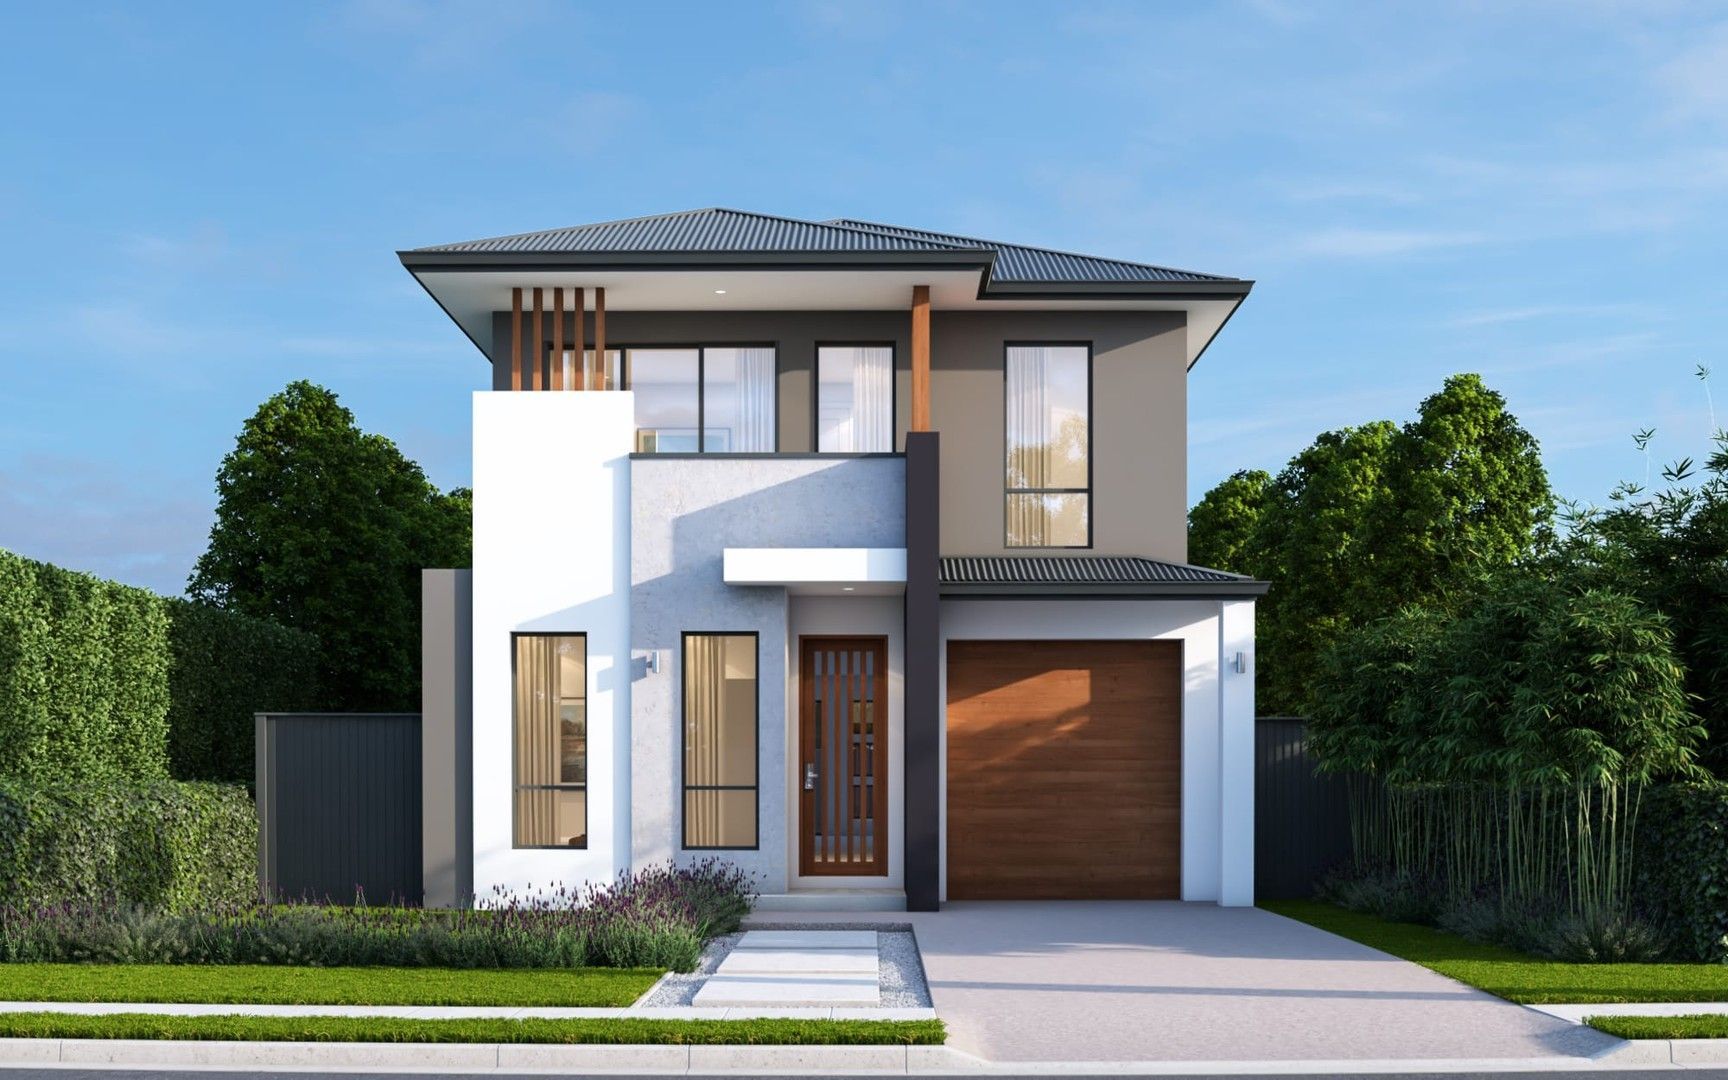 4 bedrooms New House & Land in CALL US TO BOOK YOUR INSPECTION THE PONDS NSW, 2769